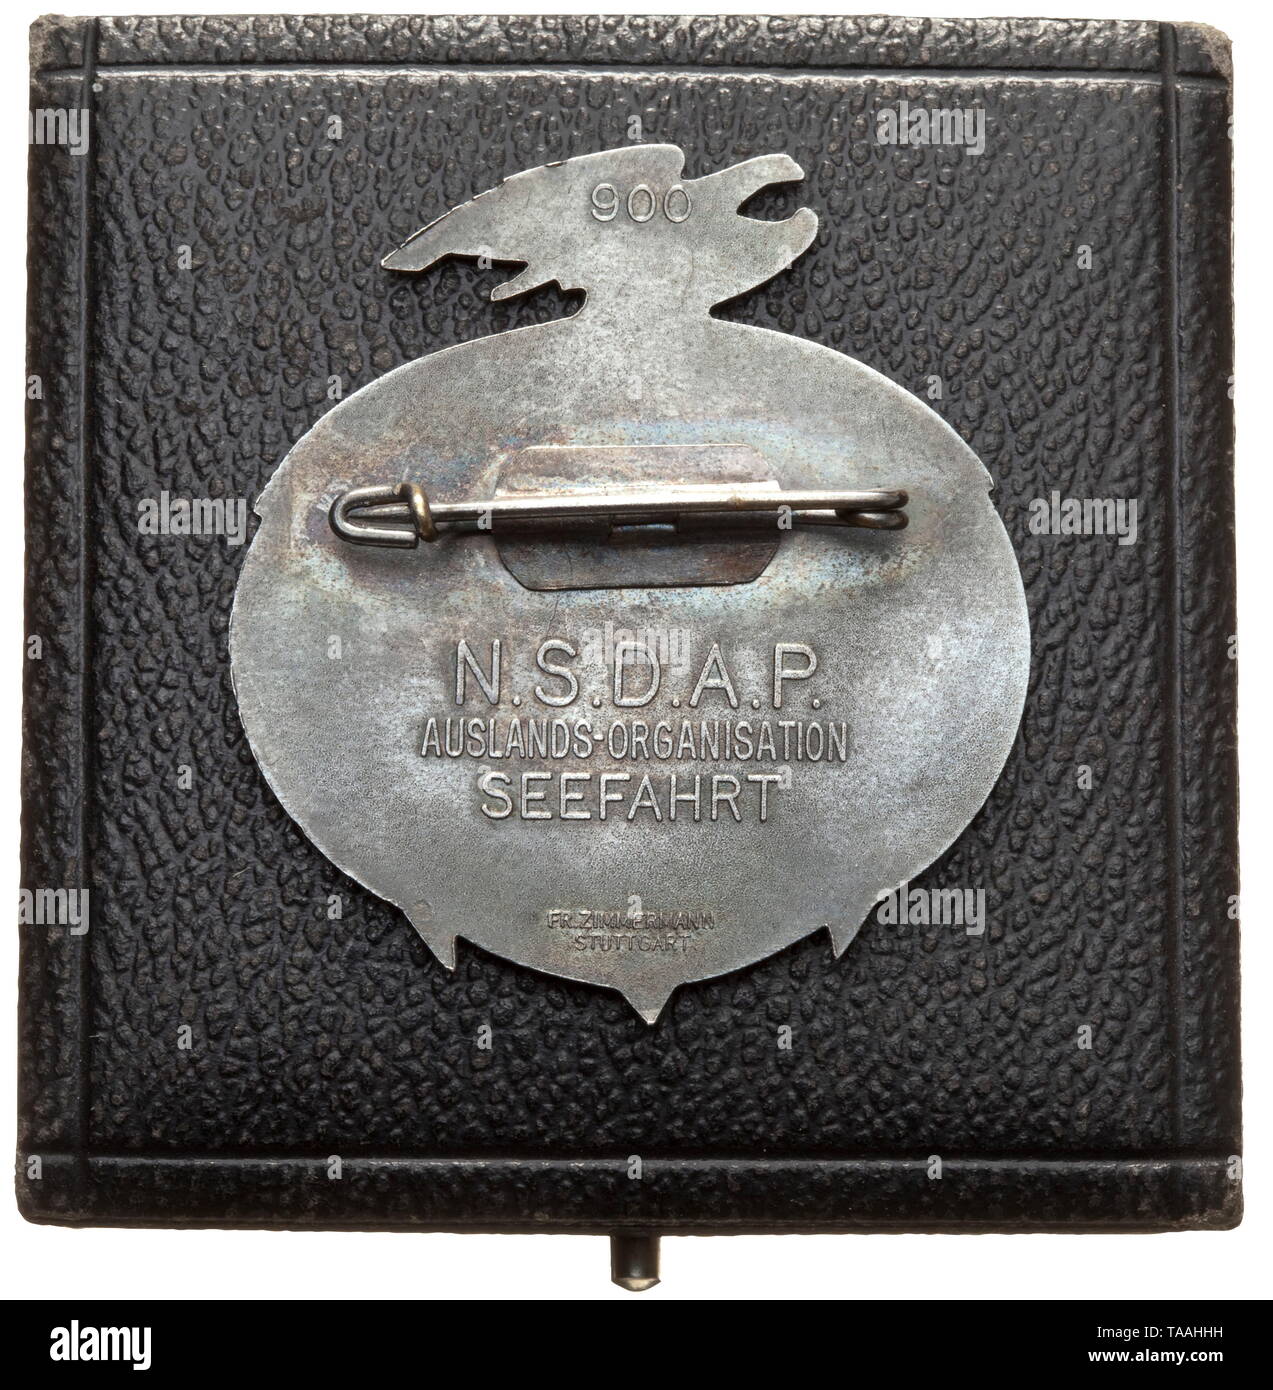 A badge for guests of honour 'Seefahrt ist Not' in a case Pin badge with sailing ship above anchor, national eagle with swastika. Motto 'Seefahrt ist Not - Tag der deutschen Seefahrt 25.-26.5.1935'. (tr. 'Navigation is necessary - Day of German Navigation 25 -26 May 1935'). On the reverse horizontal attachment pin and mark '900' as well as inscription 'N.S.D.A.P - Auslands-Organisation Seefahrt', manufacturer's mark 'Fr. Zimmermann Pforzheim'. In a matching presentation case. Dimensions of case 6 x 6.5 cm. Rare. historic, historical, awards, award, German Reich, Third Reich, Editorial-Use-Only Stock Photo